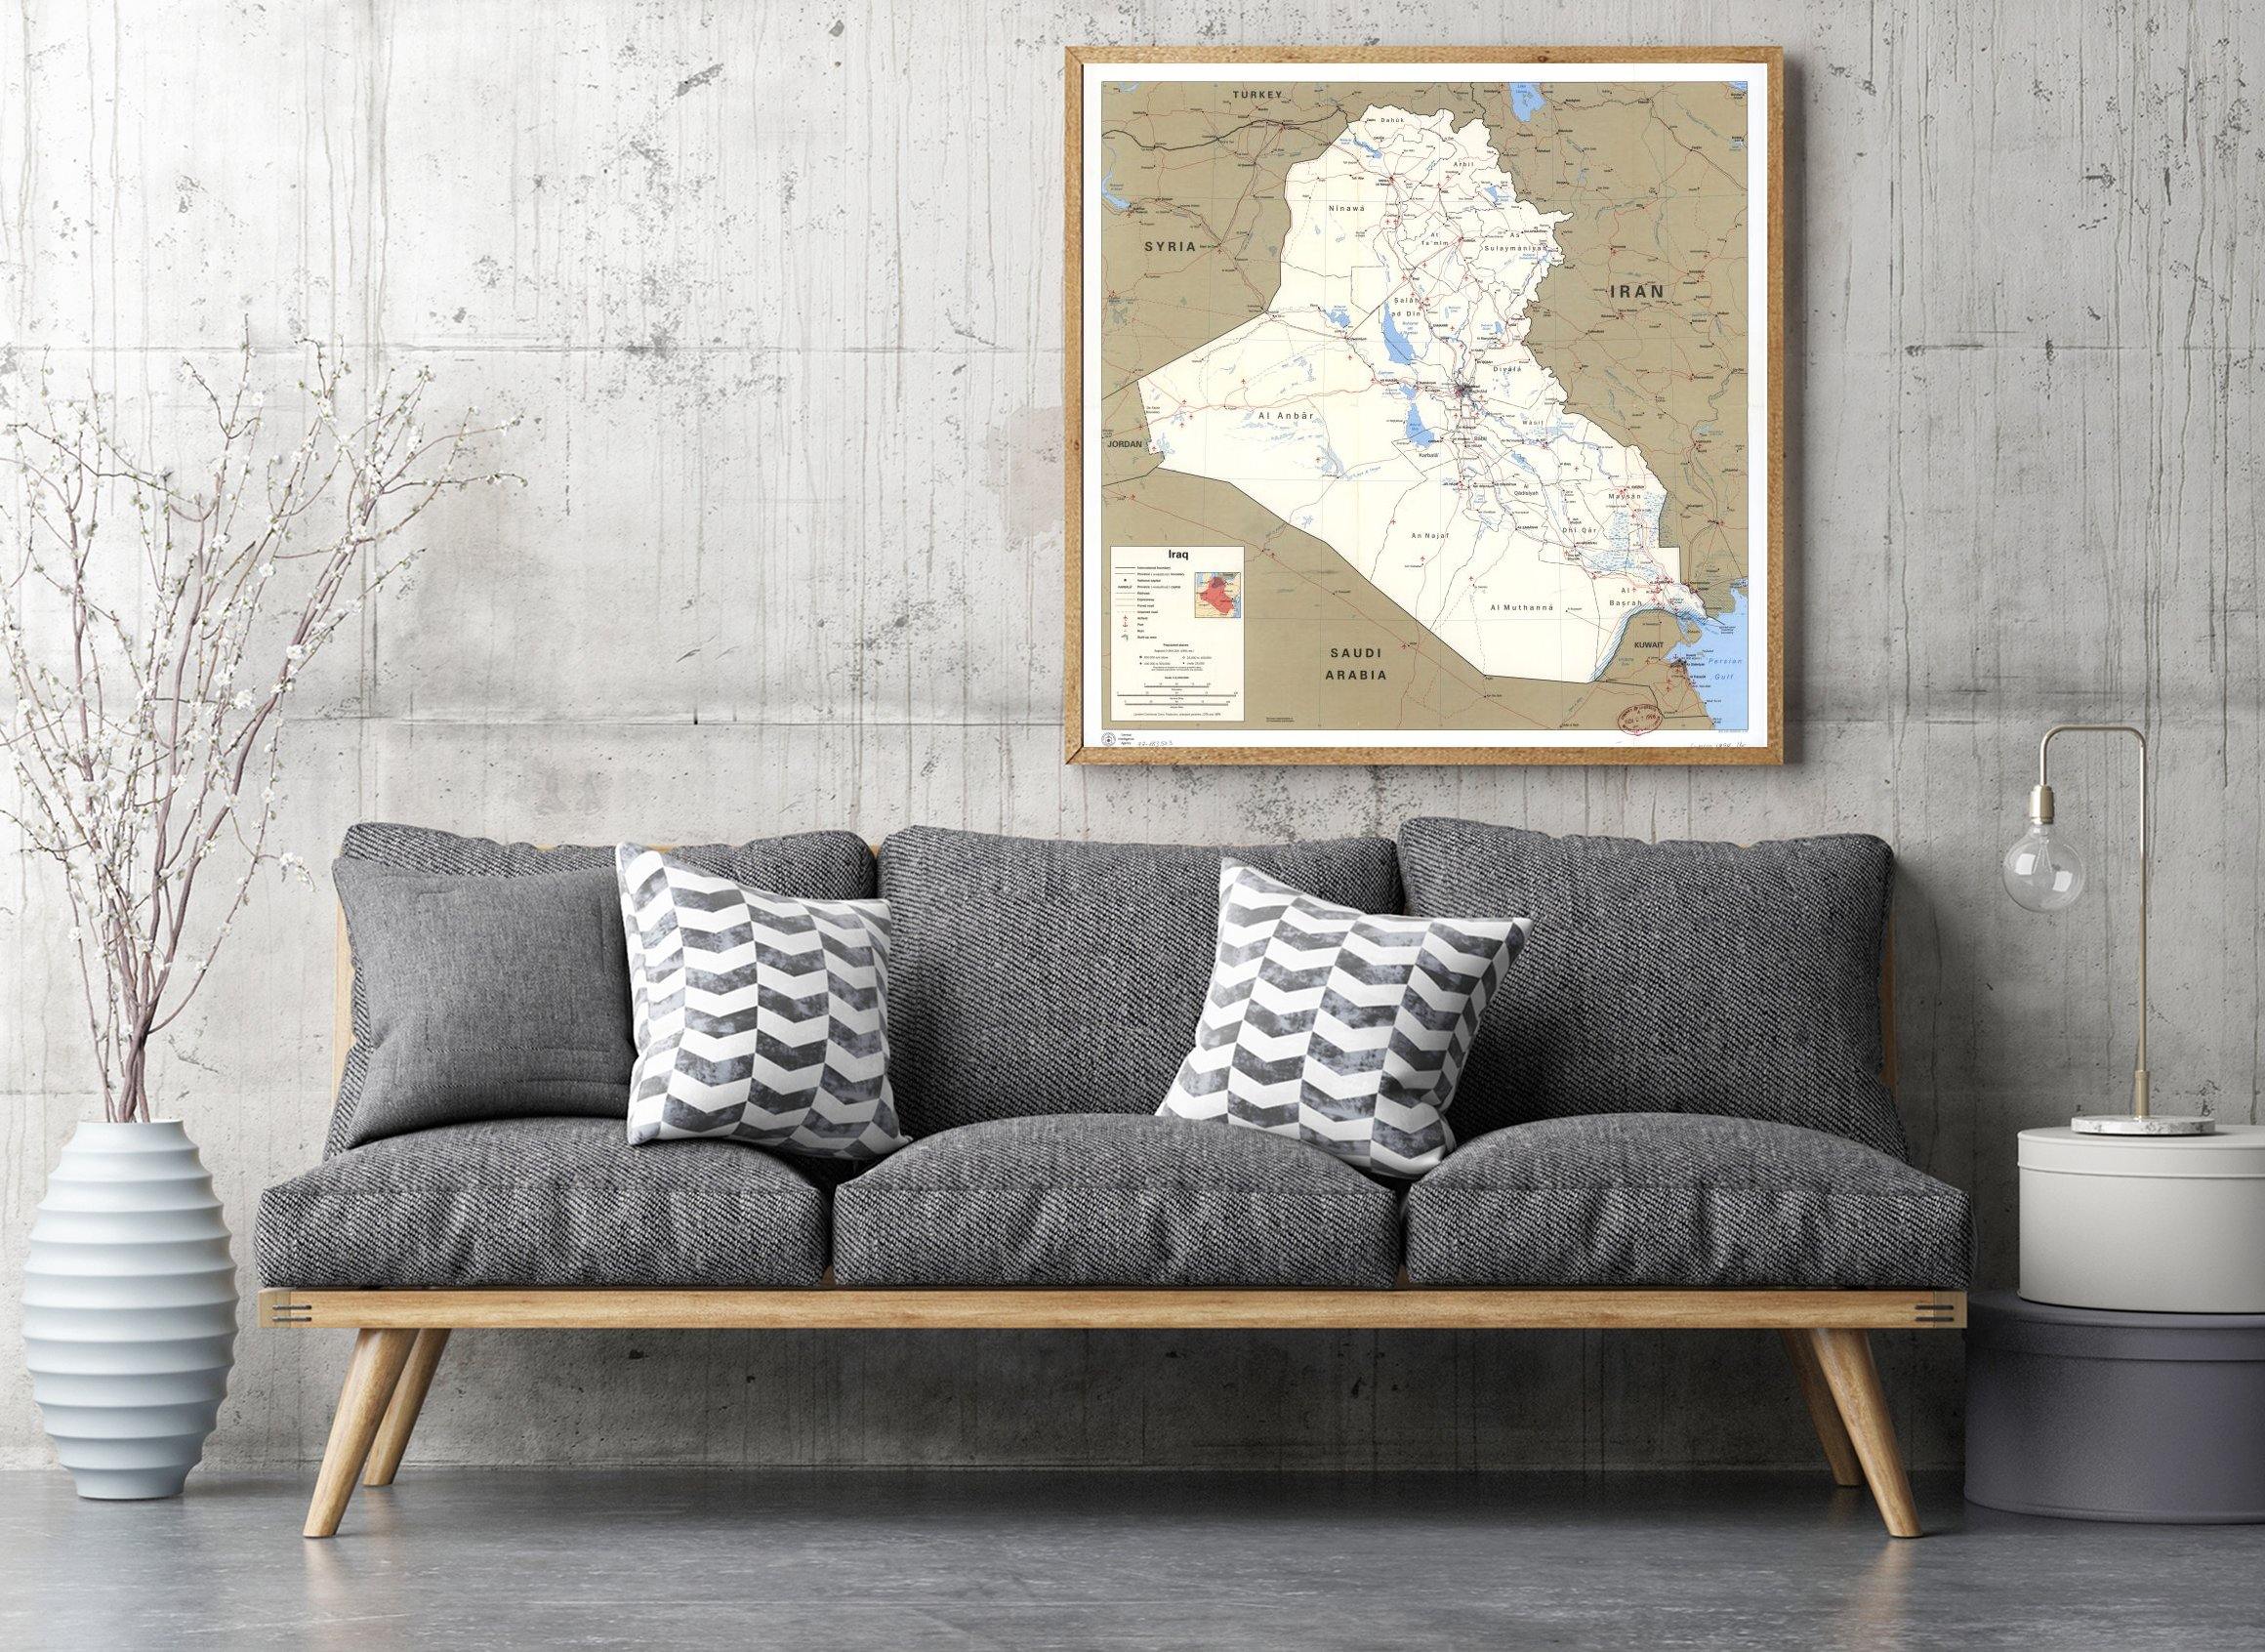 1994 Map| Iraq| Iraq Map Size: 24 inches x 24 inches |Fits 24x24 size - New York Map Company